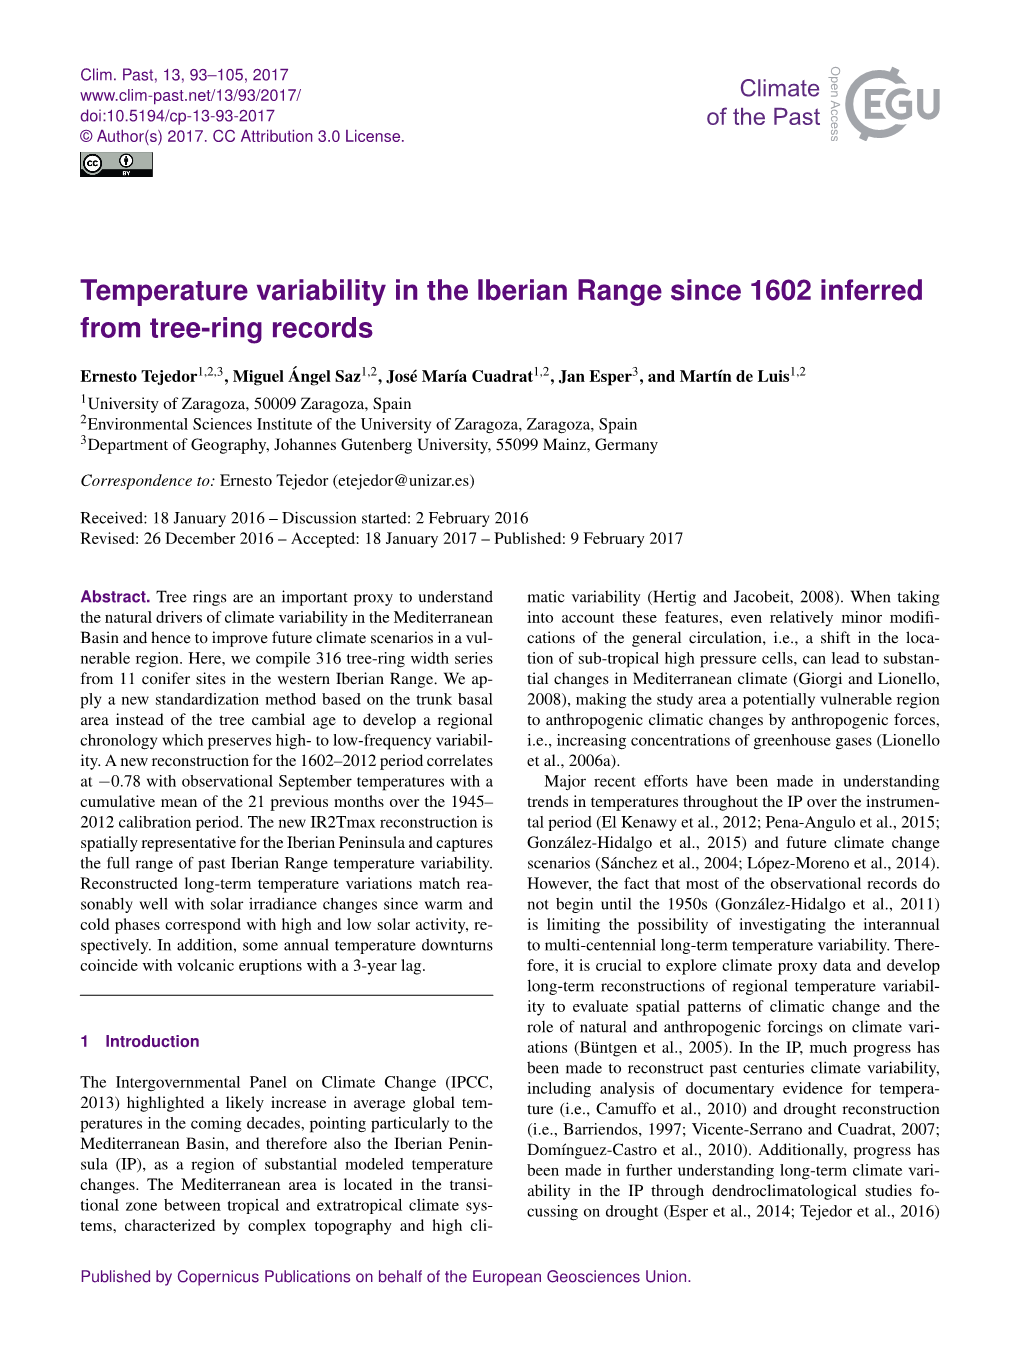 Temperature Variability in the Iberian Range Since 1602 Inferred from Tree-Ring Records